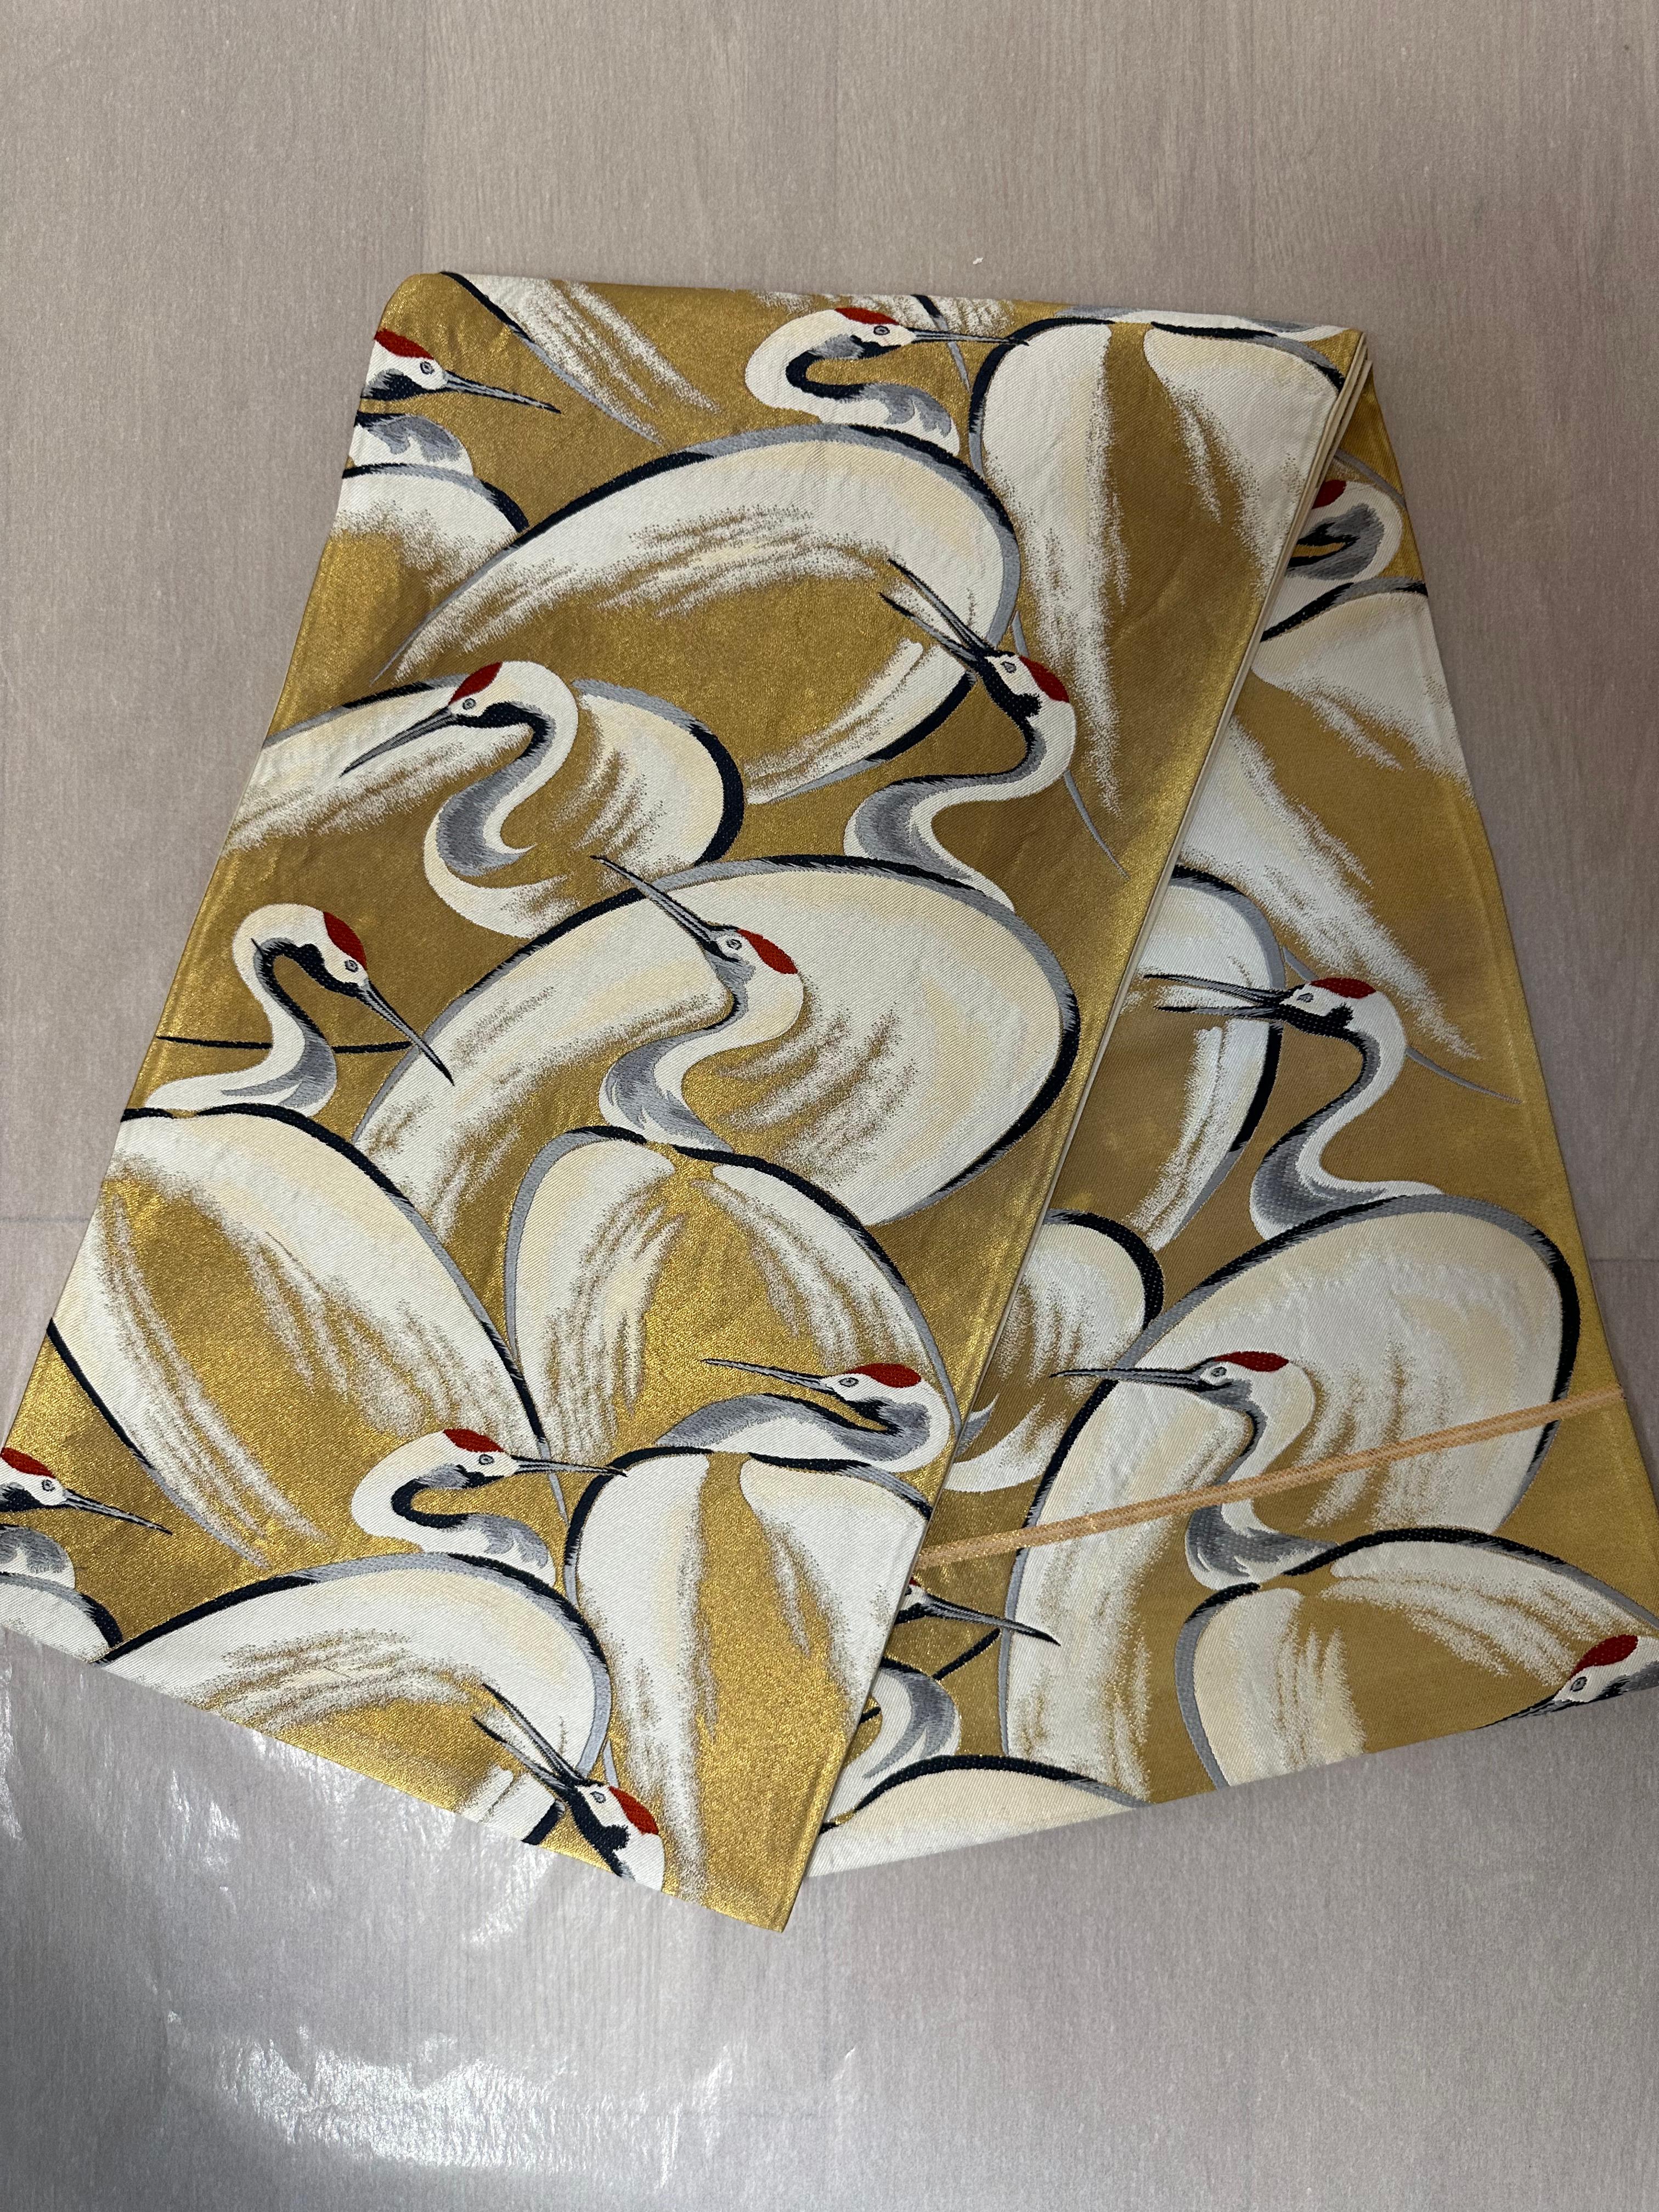 Japanese Vintage Kimono Obi, selected by Kimono-Couture

Dimensions: 413×30.5cm
Conditions:Good Condition

The Japanese kimono obi is a traditional Japanese craft that is produced through countless processes.
Kimono obis are filled with the delicate